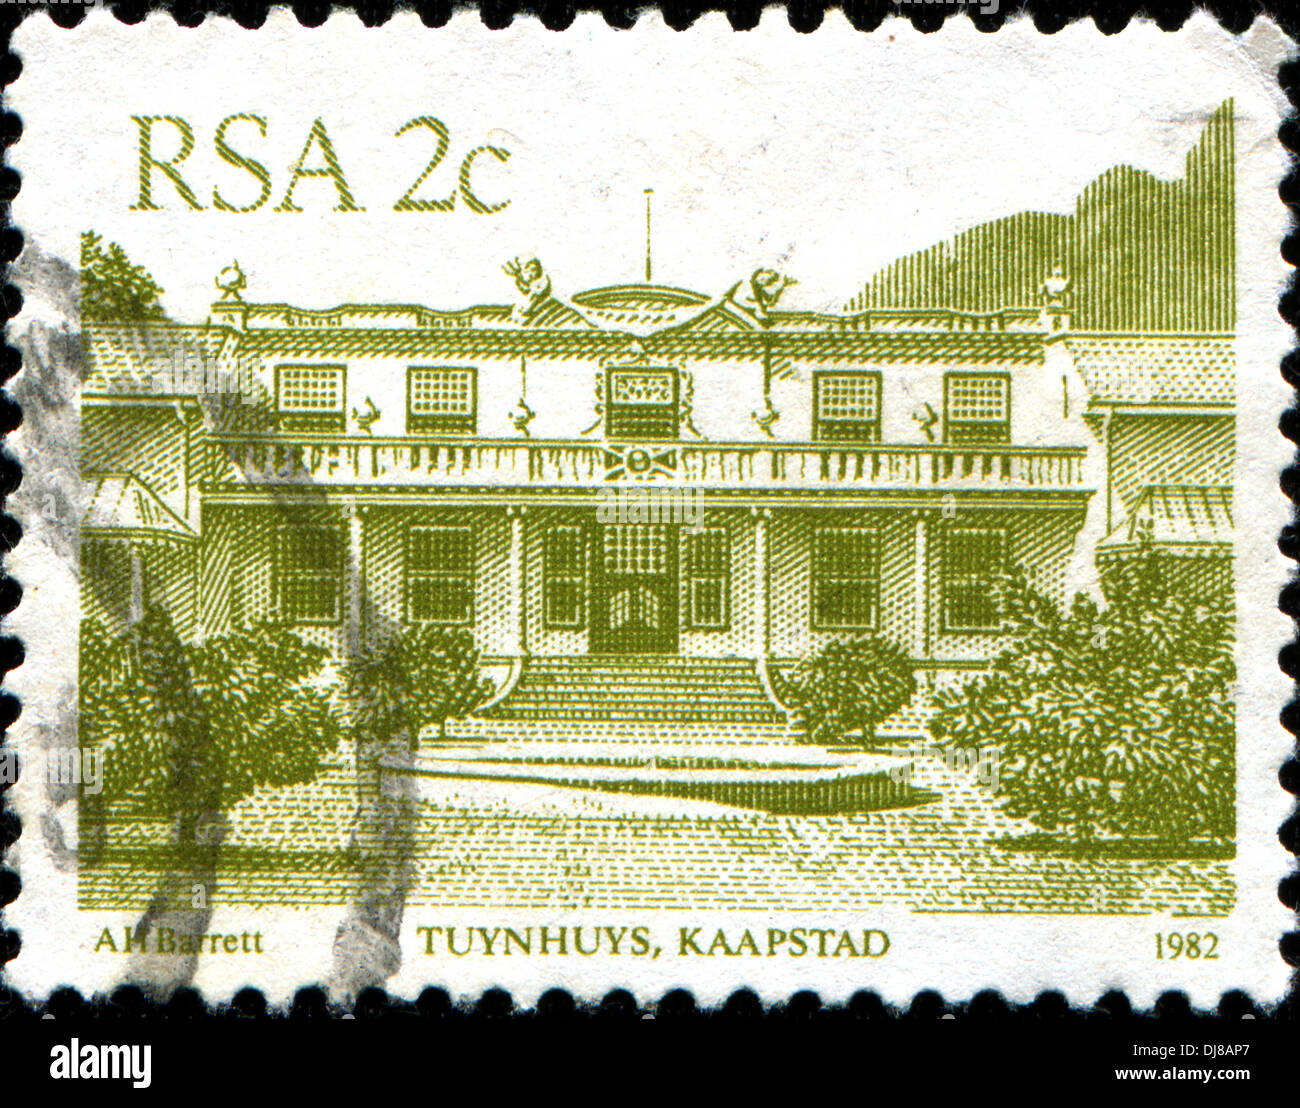 SOUTH AFRICA - CIRCA 1982: A stamp printed in South Africa (RSA) shows Tuynhuys, Kaapstad, circa 1982  Stock Photo